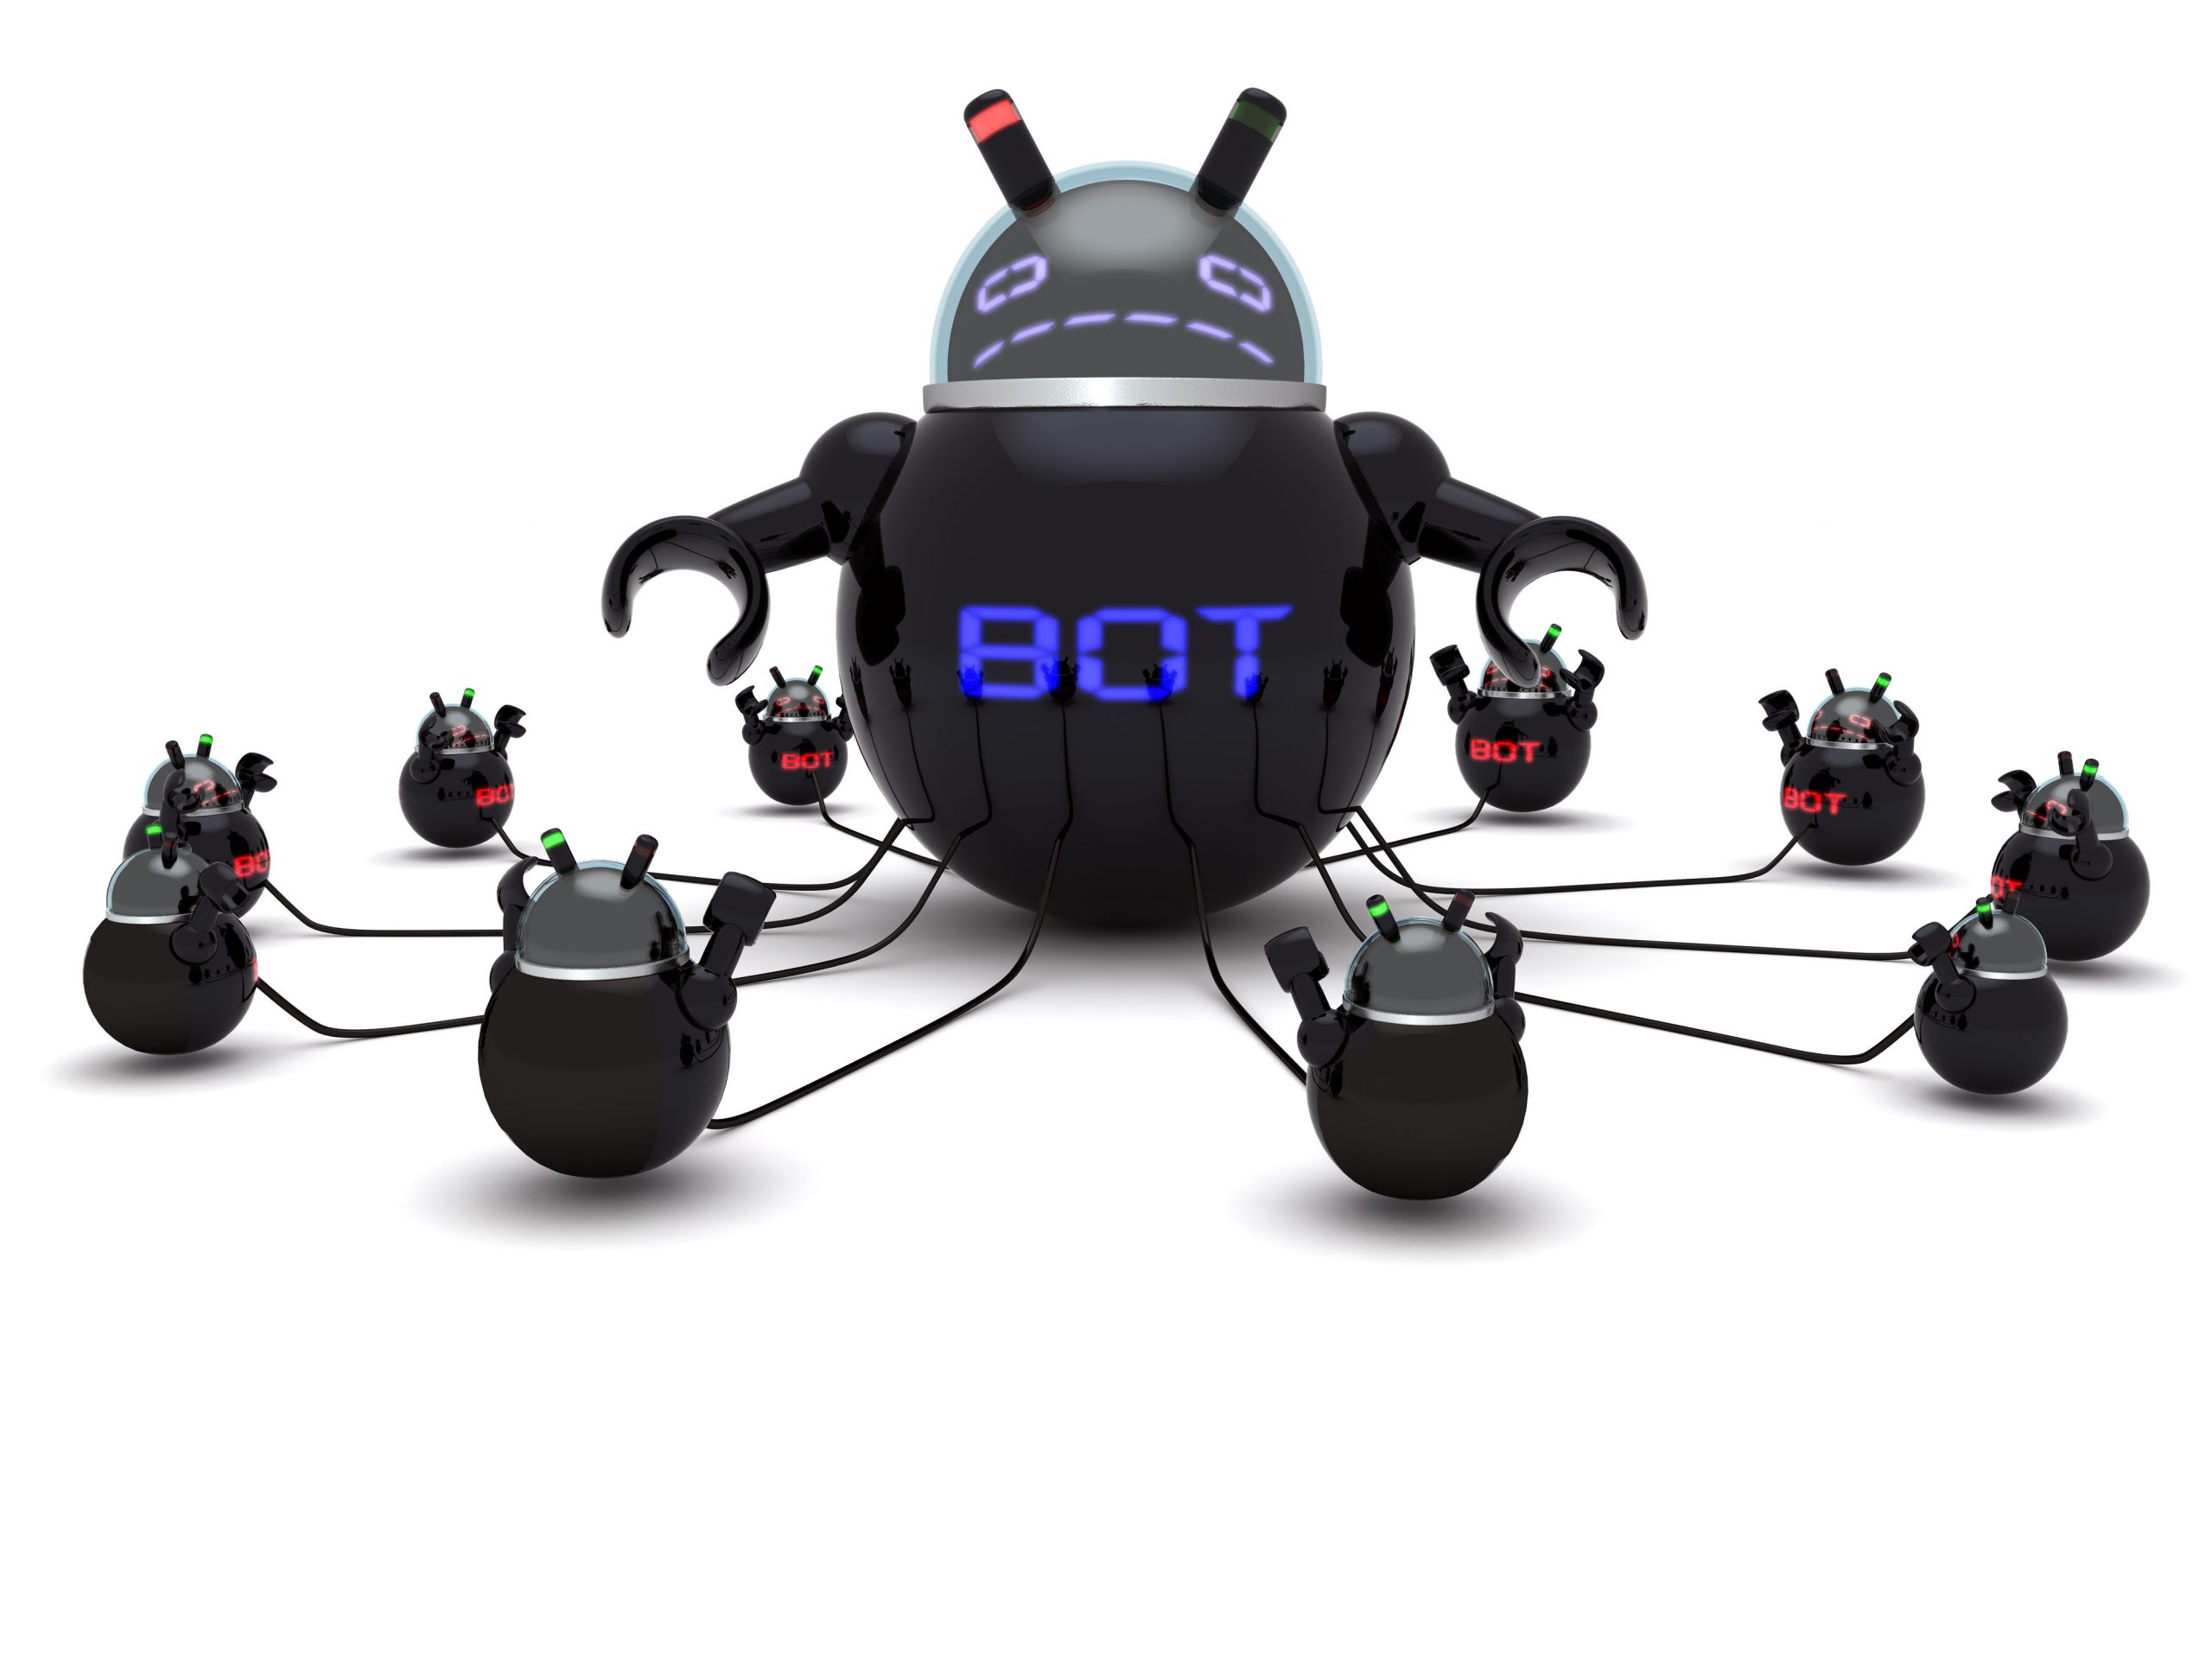 The Ramnit Botnet is back after the law enforcement takedown